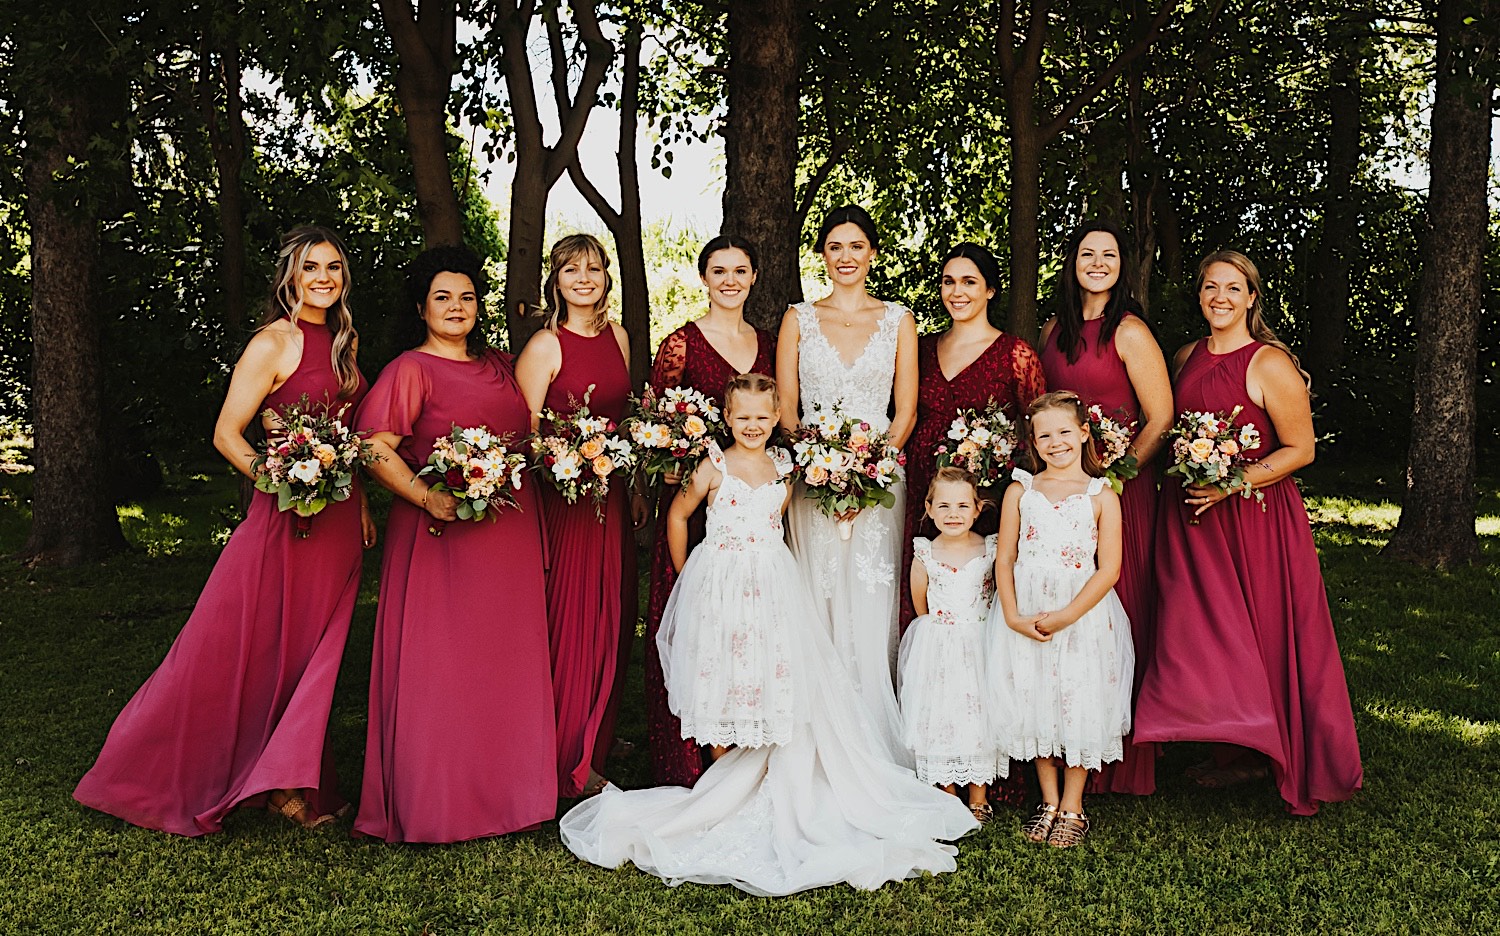 A bride stands in front of a row of trees and smiles with her bridesmaids and flower girls after a wedding ceremony at Legacy Hill Farm